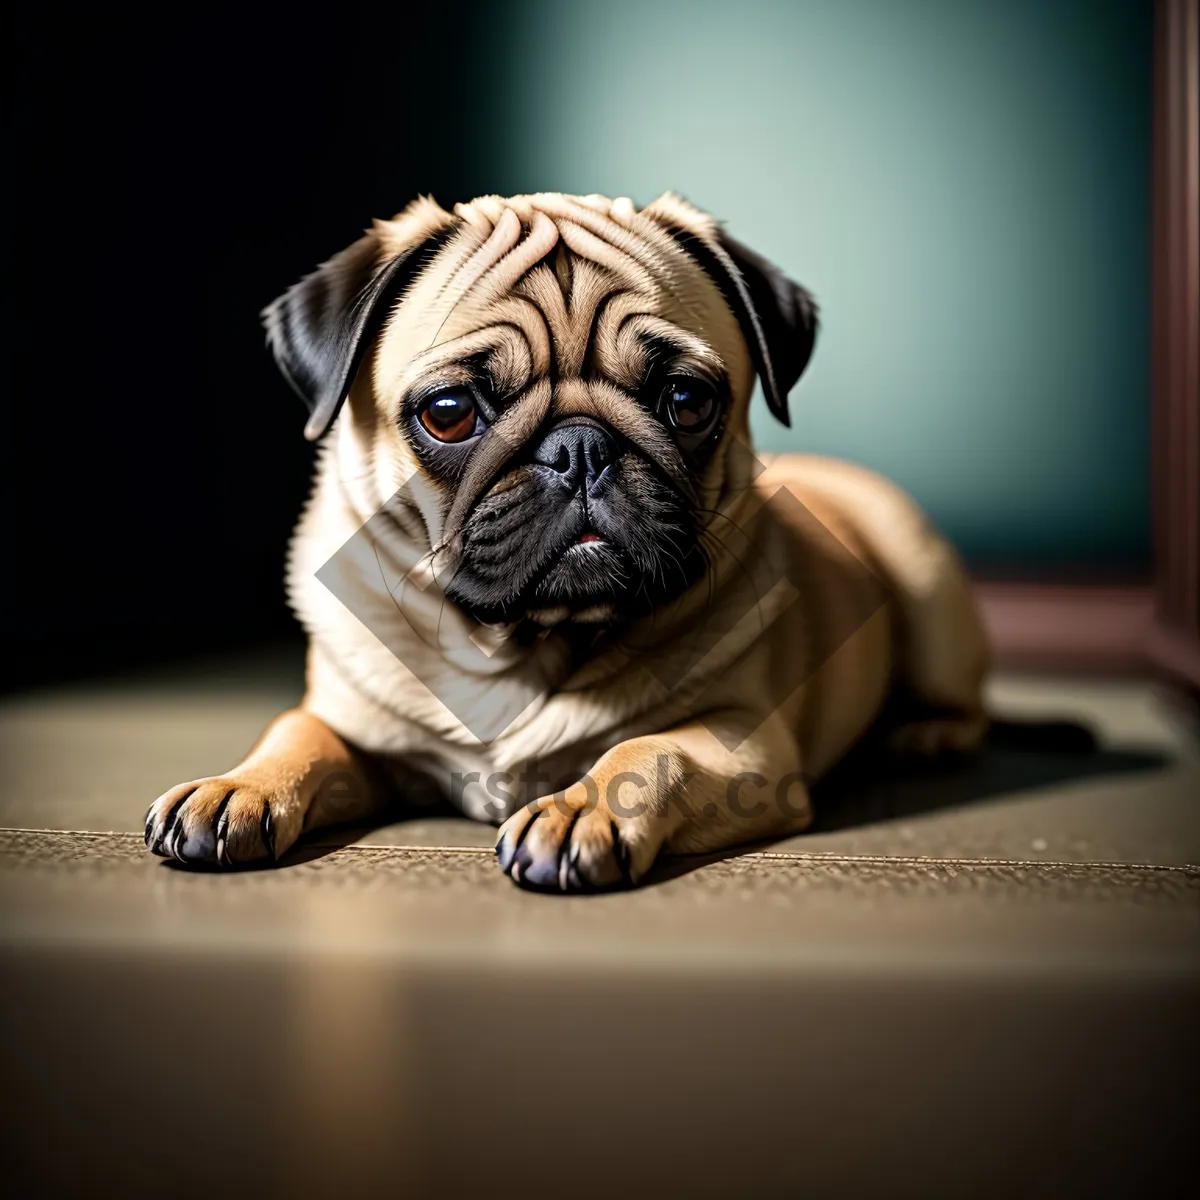 Picture of Cute Pug Puppy with Wrinkled Face